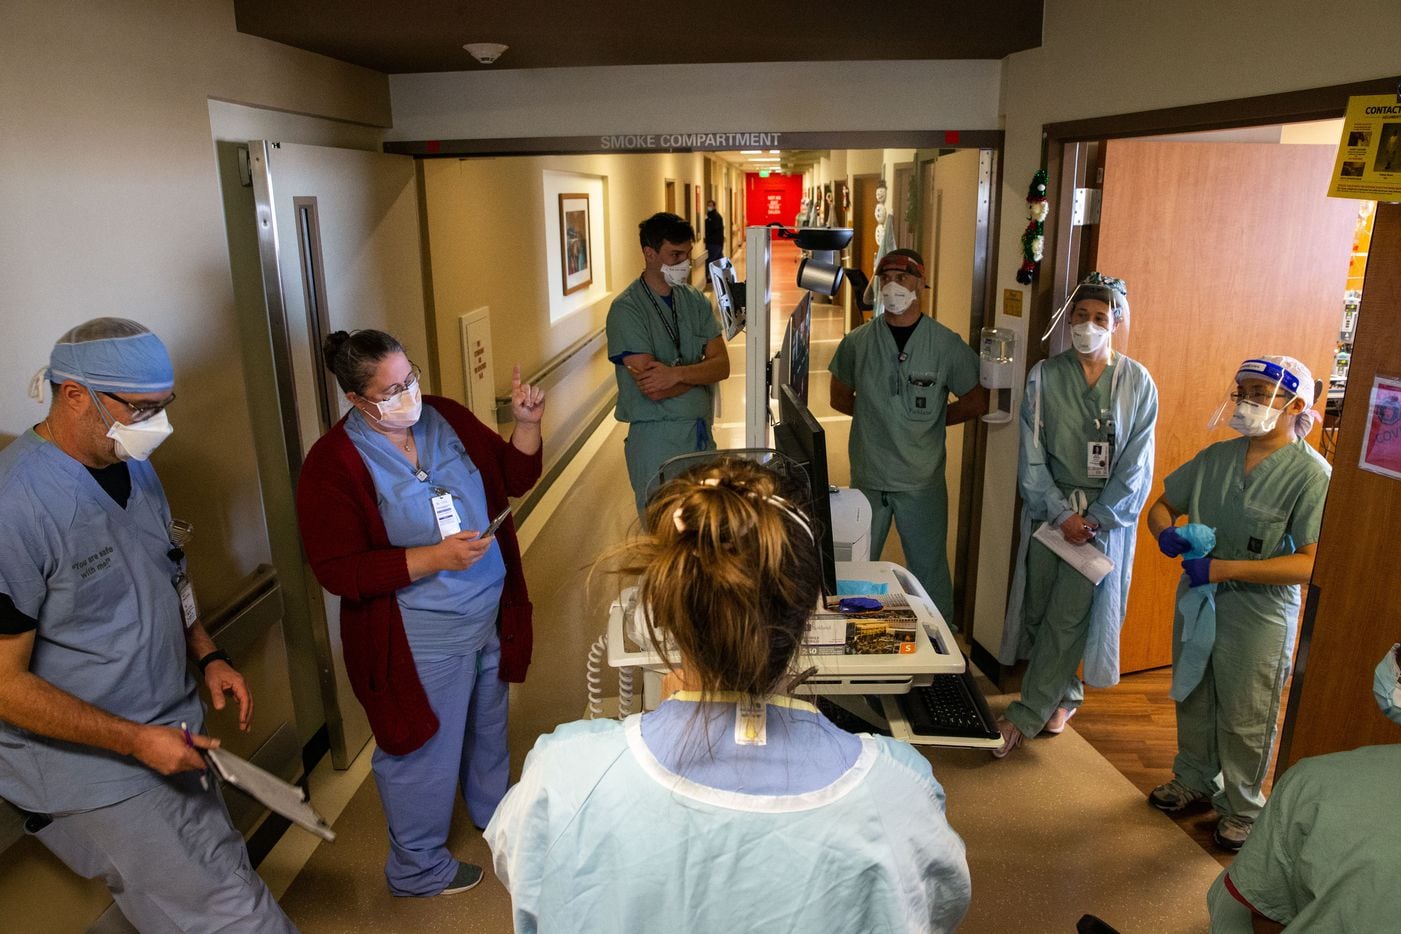 Rowley (second from left) huddles with Dr. Catherine Chen (right) and other staff members on the Progressive Care Unit of Parkland's COVID-19 Tactical Care Unit. Rowley and Chen were assessing the level of care for patients to determine whether they should be upgraded to the Intensive Care Unit or downgraded out of the TCU. “I anticipate things are going to go poorly,” Rowley said, referencing high travel numbers over the Thanksgiving holiday. “There's not going to be a single thing we can do to stop it. And all we can do is hope that we can keep enough people alive that can defeat this disease.”